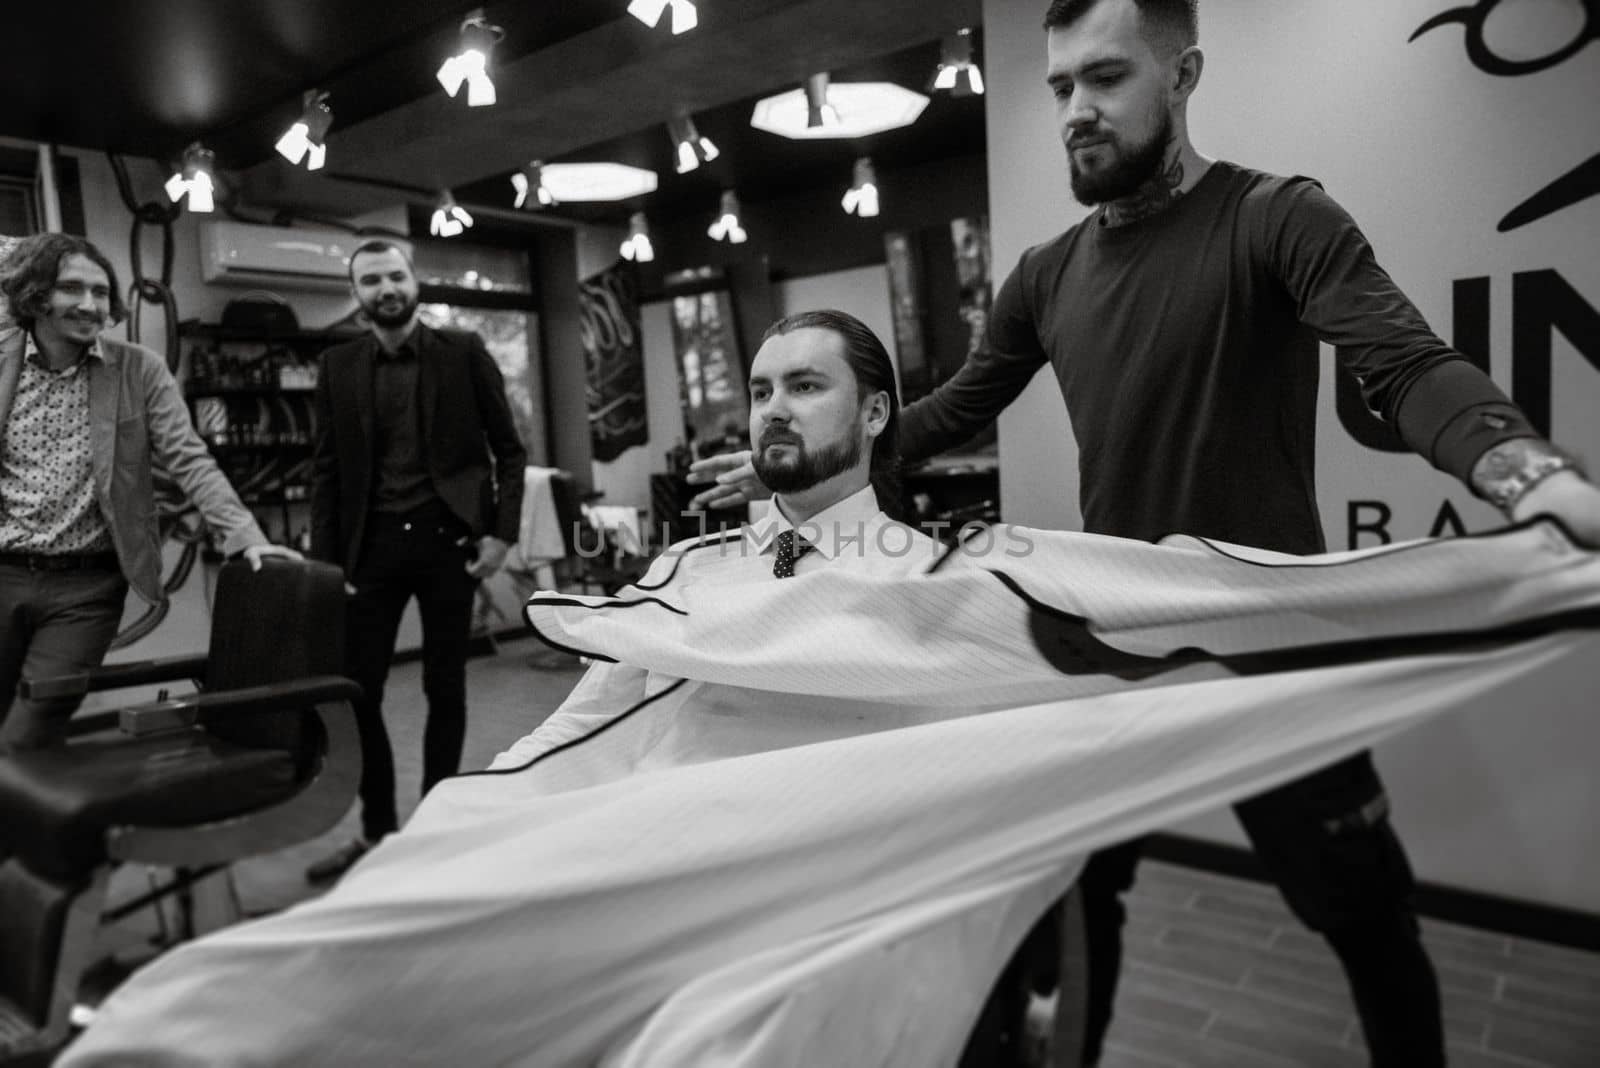 bearded man cutting his beard in the barbershop by Andreua